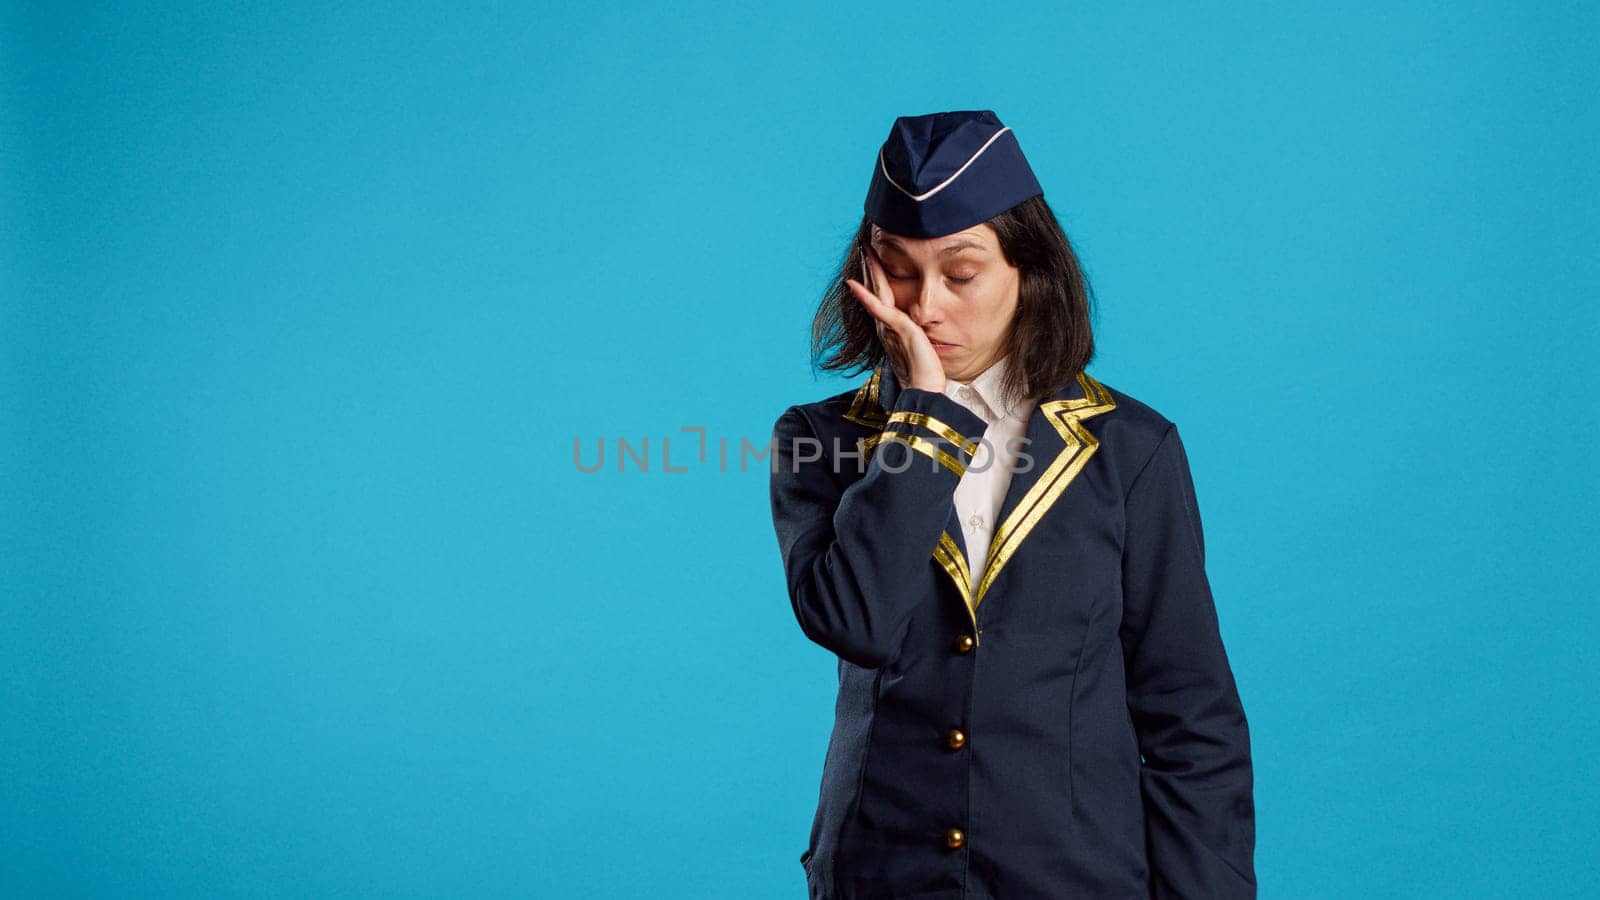 Air hostess feeling tired and yawning in studio, being drained and worn out after commercial flight work. Aircrew member dressed as stewardess being exhausted and falling asleep.